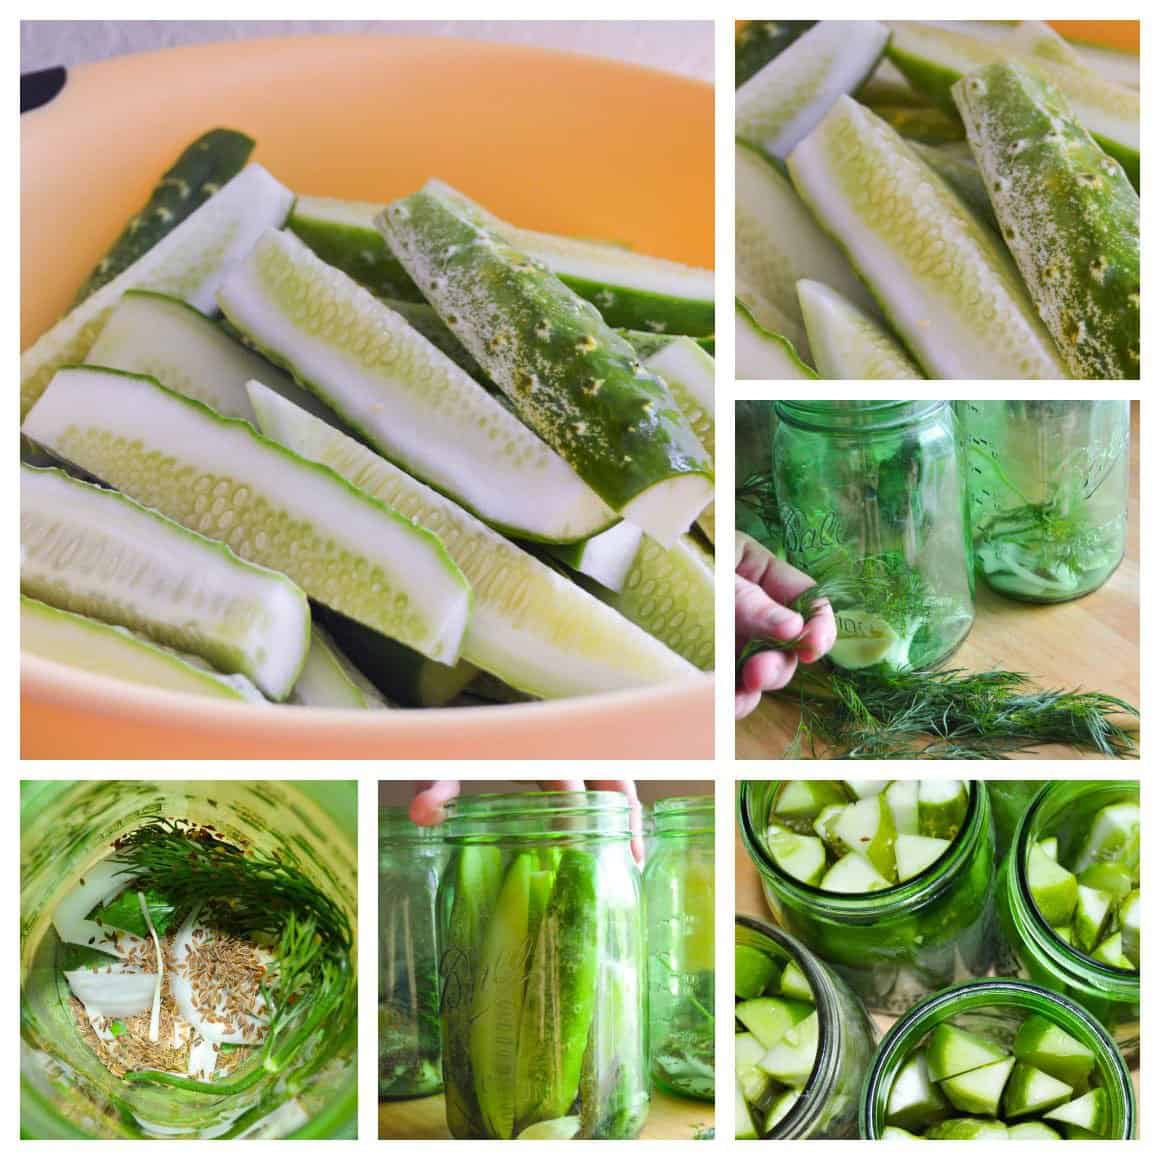 Step by Step Homemade Deli Style Dill Pickles Collage